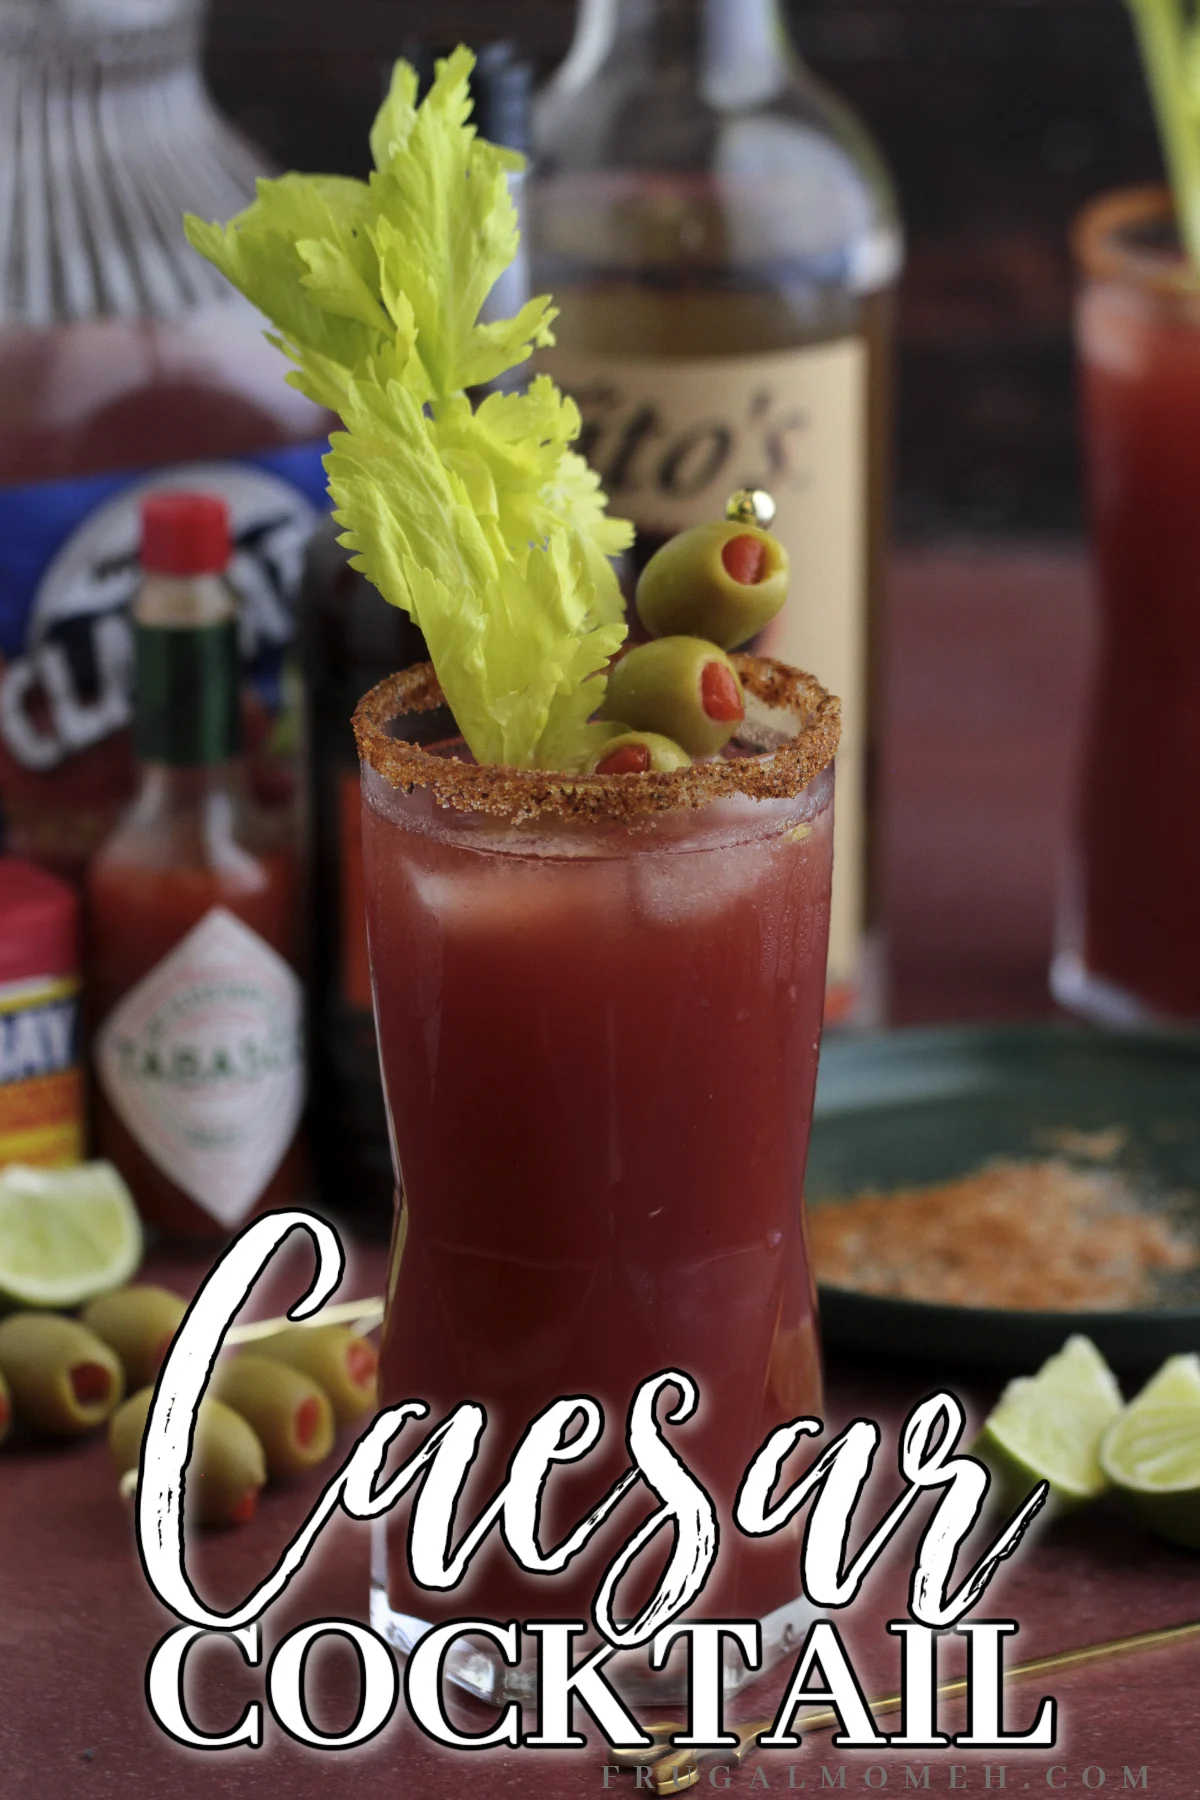 Make an unbeatable classic Canadian Caesar cocktail that will set your next brunch or dinner party apart with this authentic recipe.